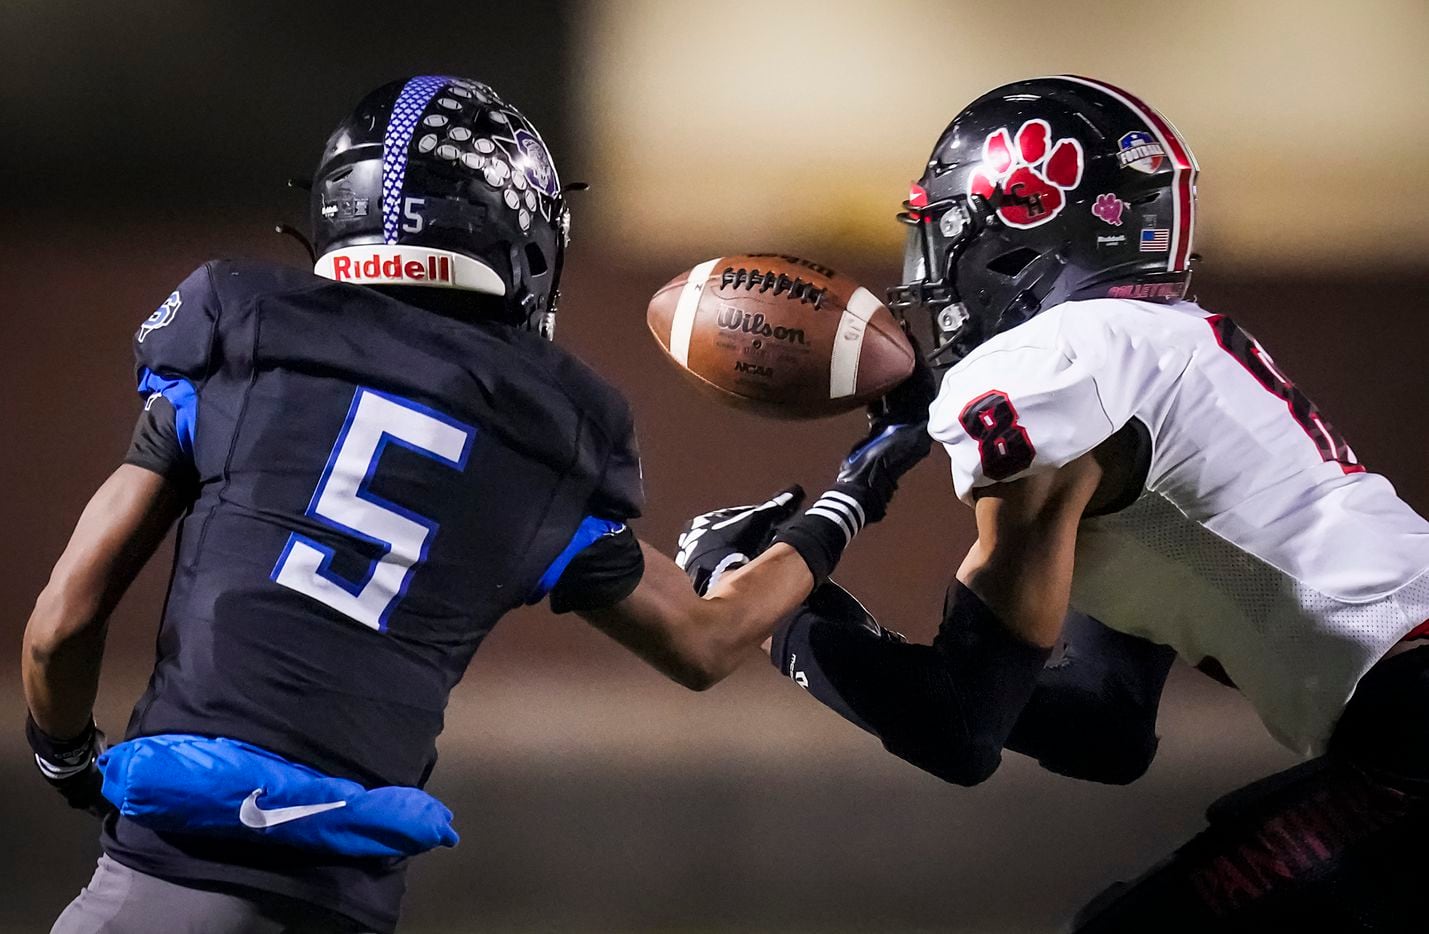 Colleyville Heritage defensive back Dylahn McKinney (8) breaks up a pass intended for Mansfield Summit wide receiver Bryan Spotwood Jr. (5) during the first half of the Class 5A Division I Region I final on Friday, Dec. 3, 2021, in North Richland Hills, Texas. (Smiley N. Pool/The Dallas Morning News)